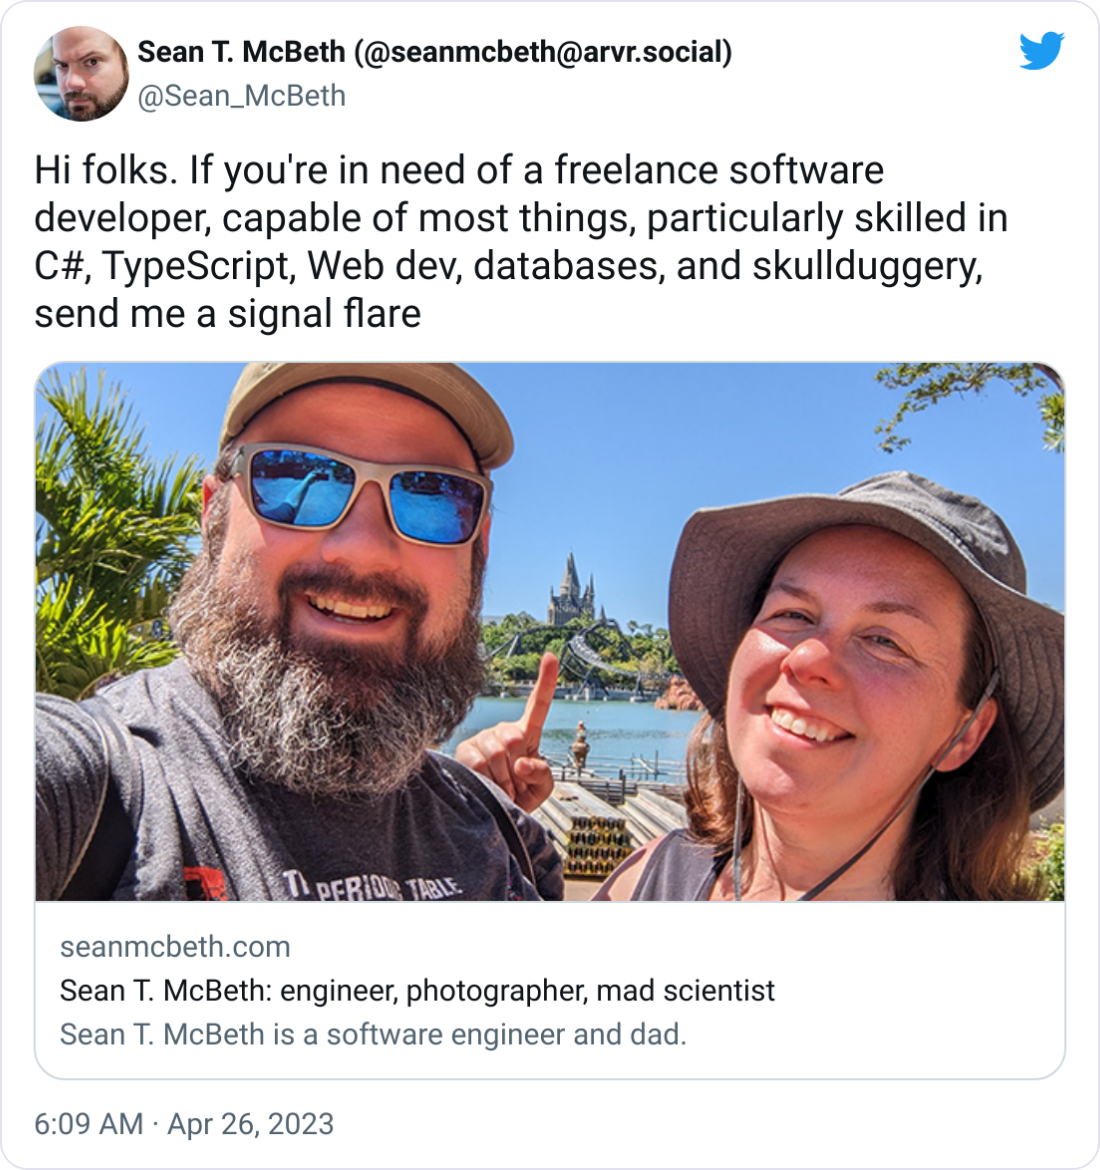 Sean T. McBeth (@seanmcbeth@arvr.social) @Sean_McBeth Hi folks. If you're in need of a freelance software developer, capable of most things, particularly skilled in C#, TypeScript, Web dev, databases, and skullduggery, send me a signal flare